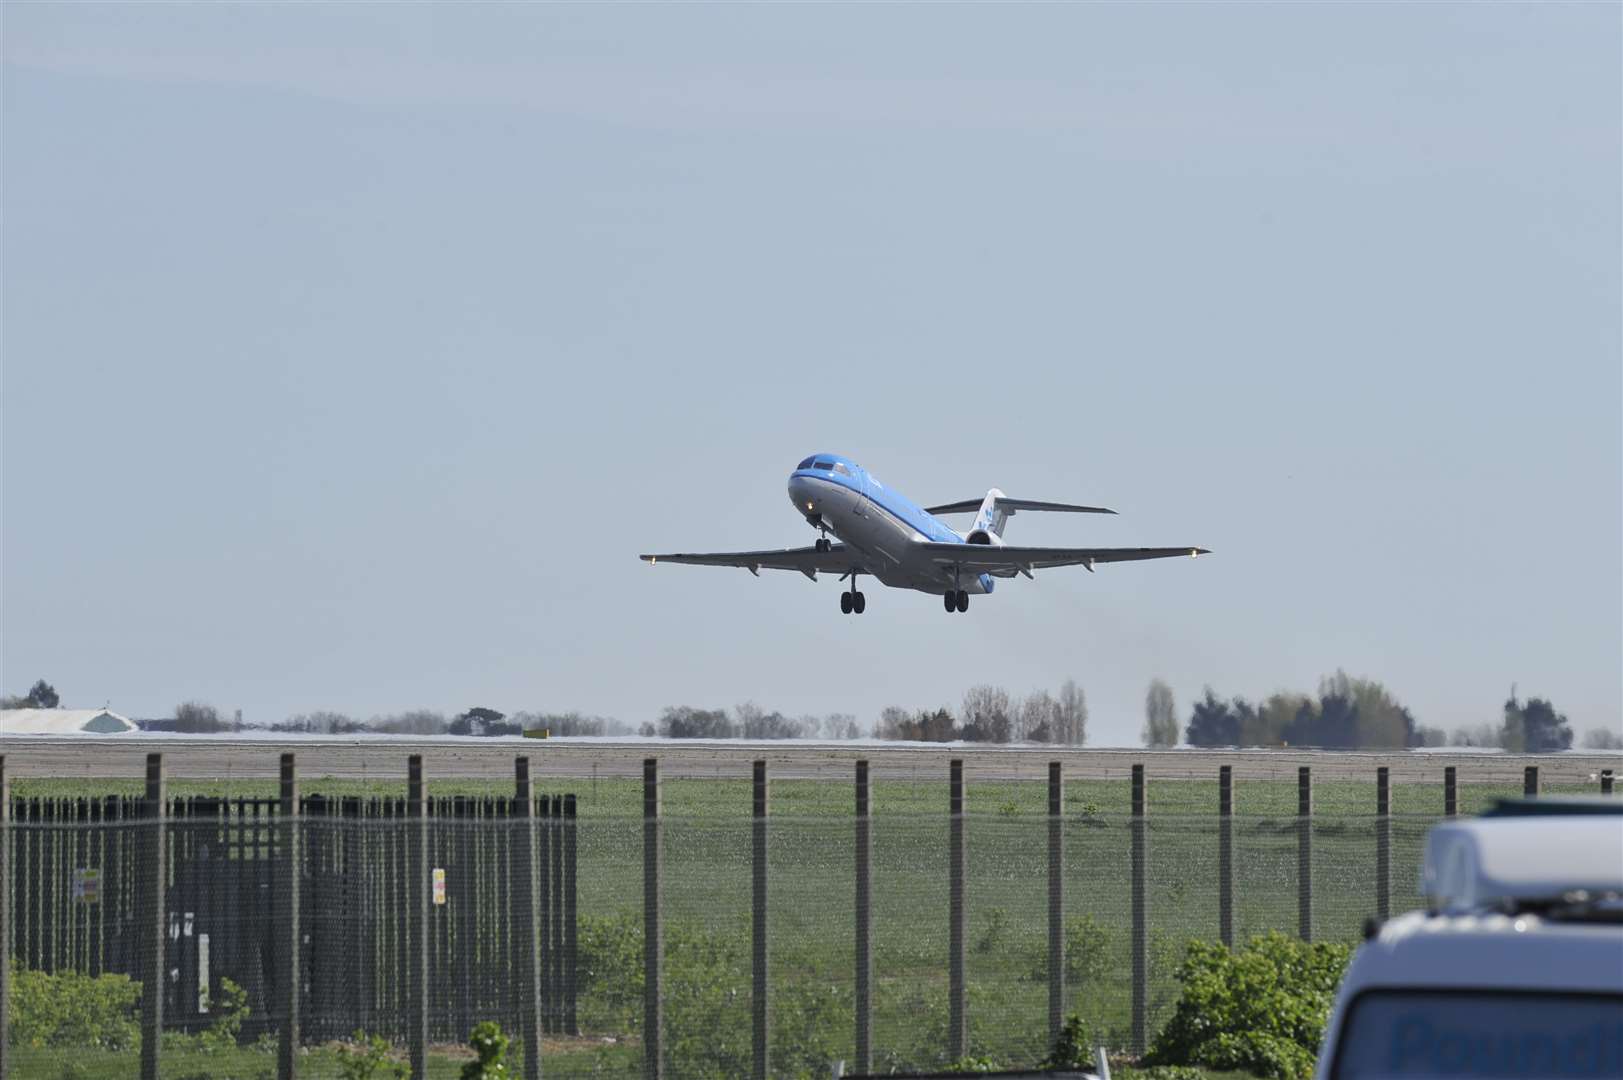 The last passenger flight from Manston airport takes off in 2014. Picture: Tony Flashman